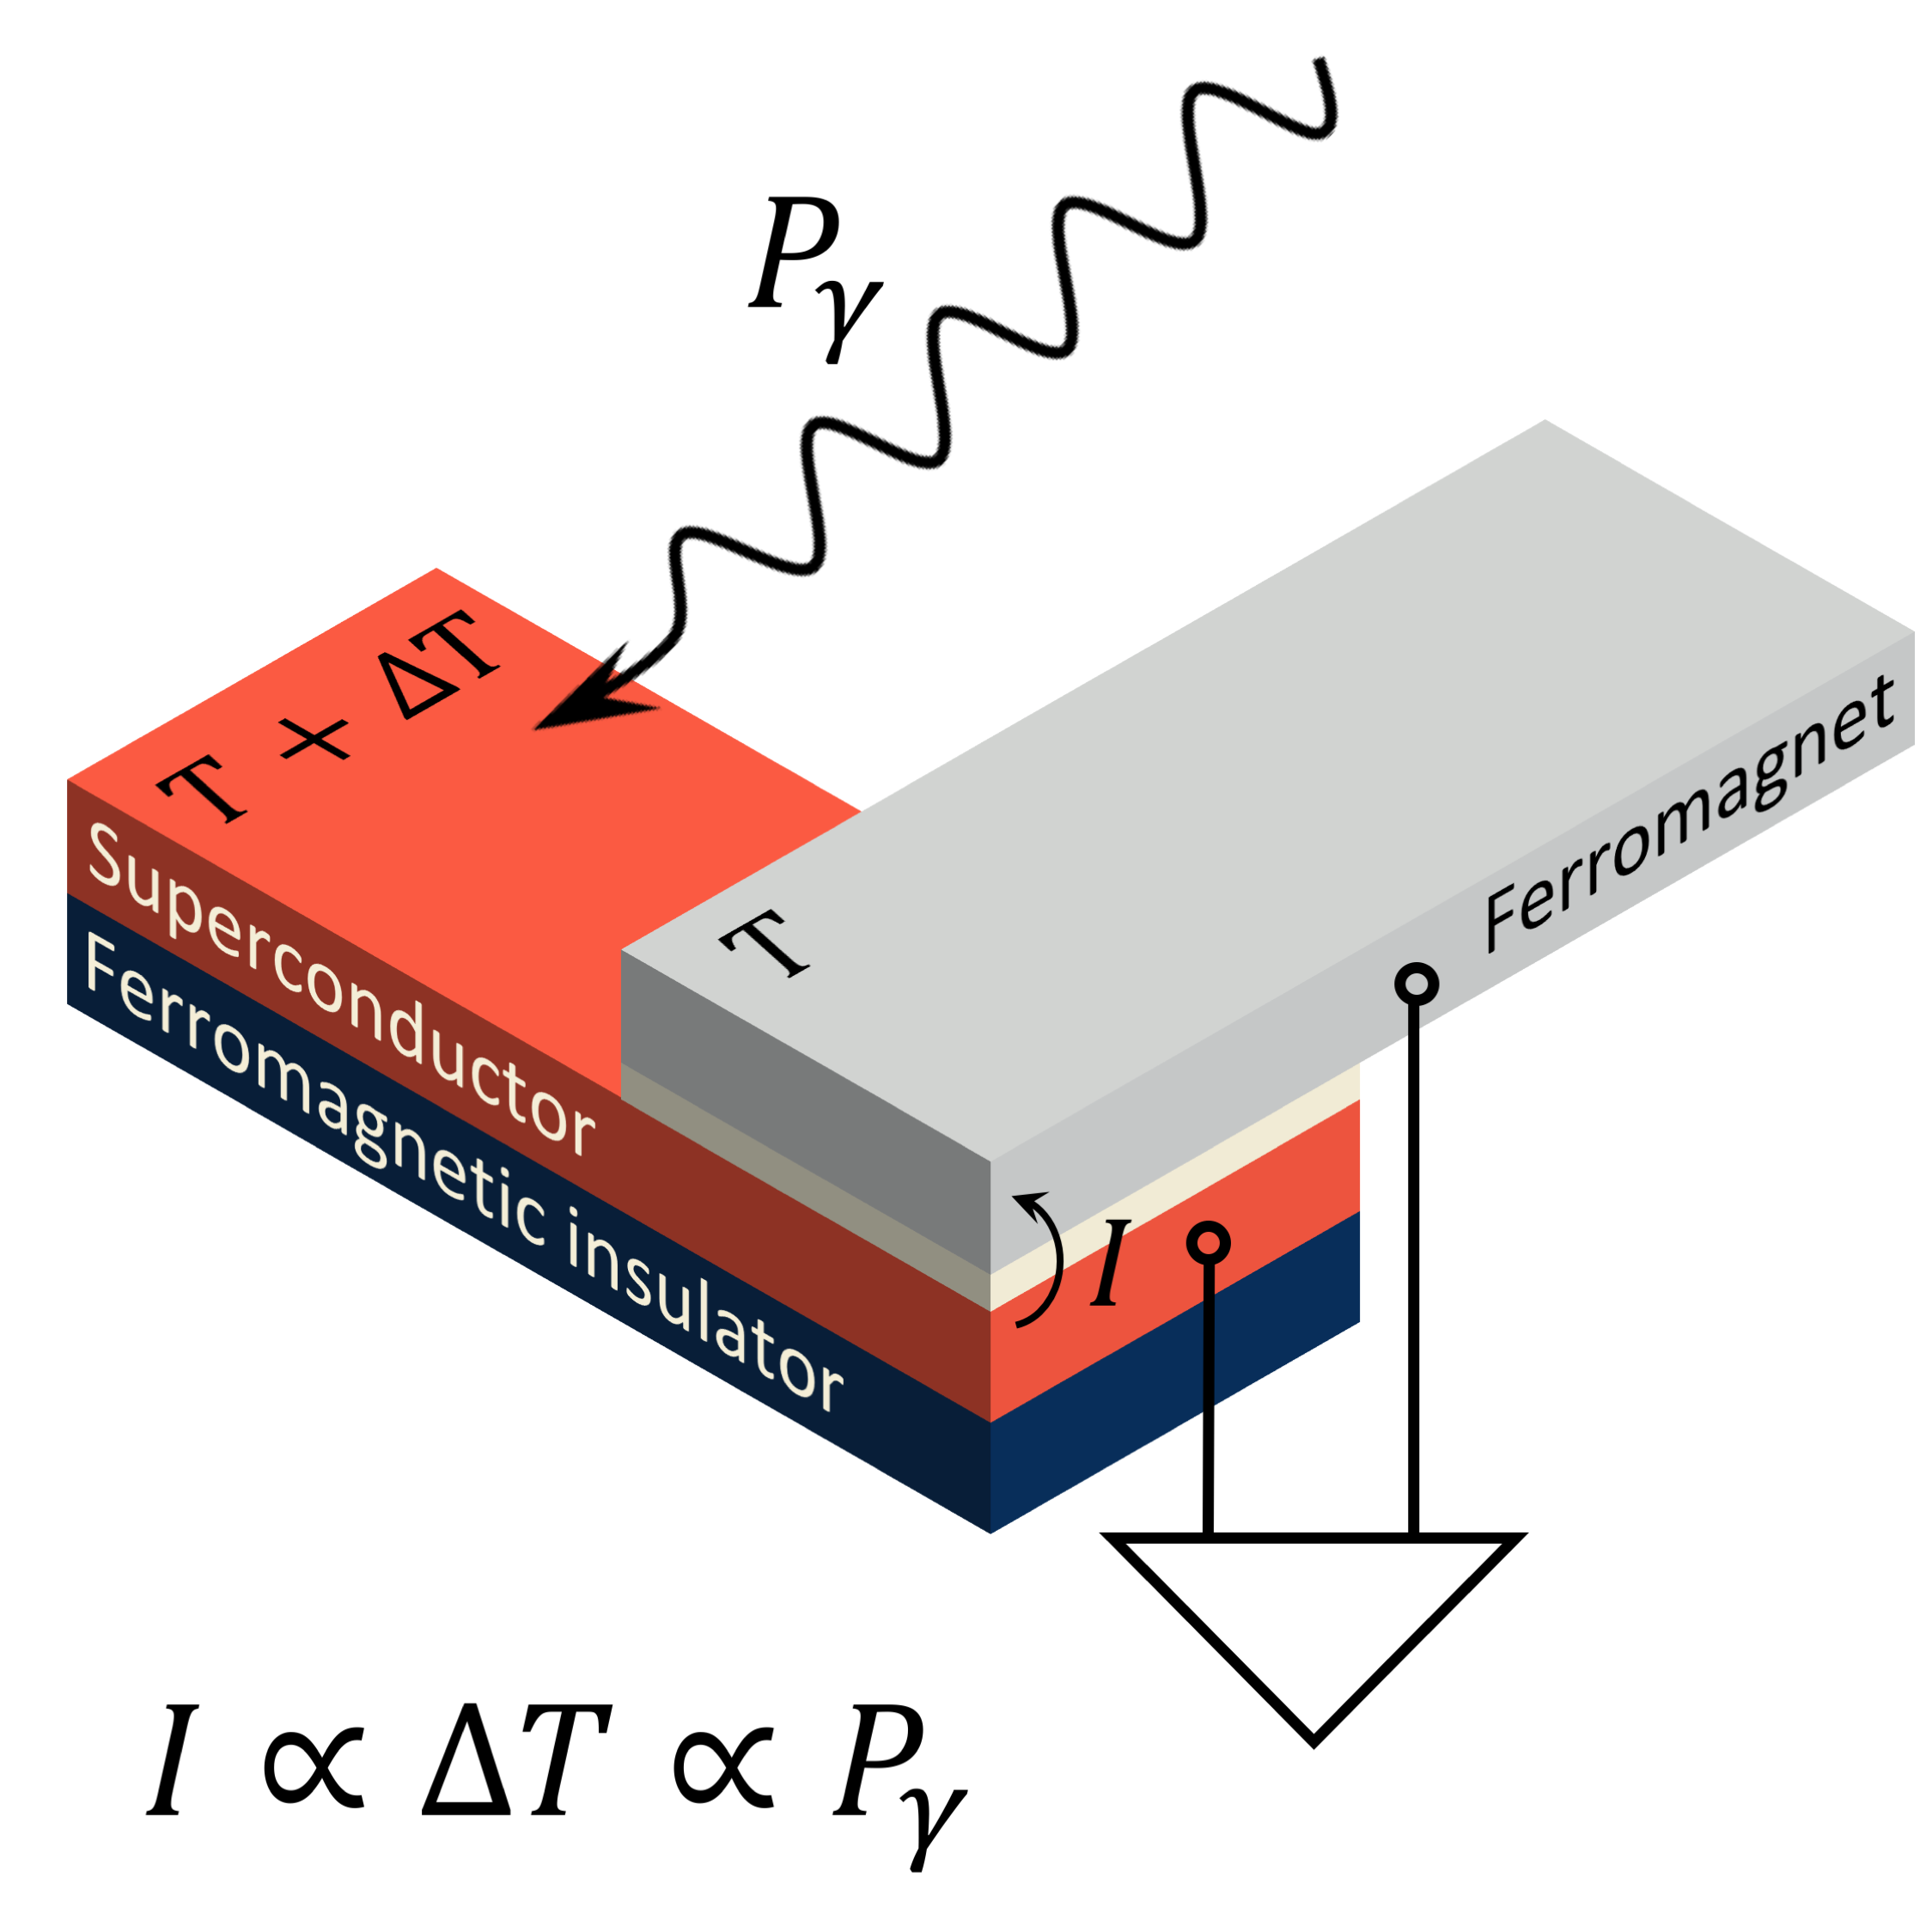 SUPERconducting ThermoElectric Detector